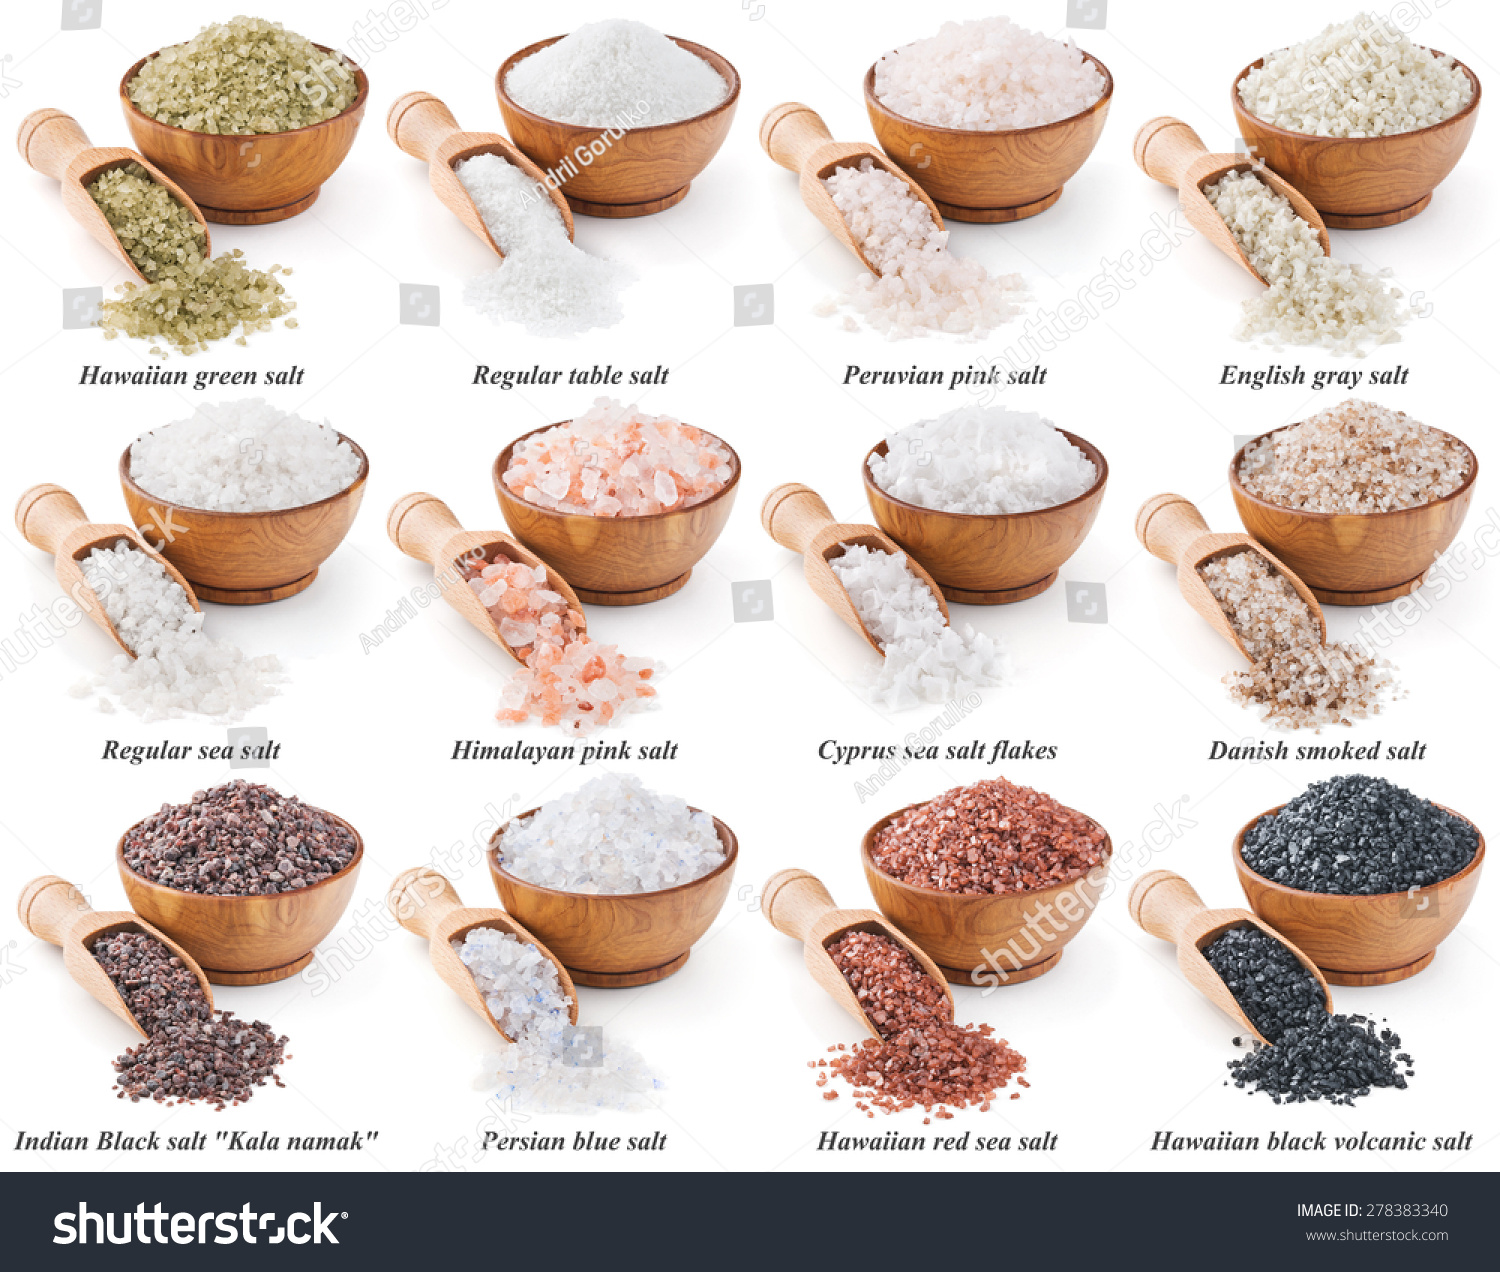 stock-photo-collection-of-different-types-of-salt-isolated-on-white-background-278383340.jpg